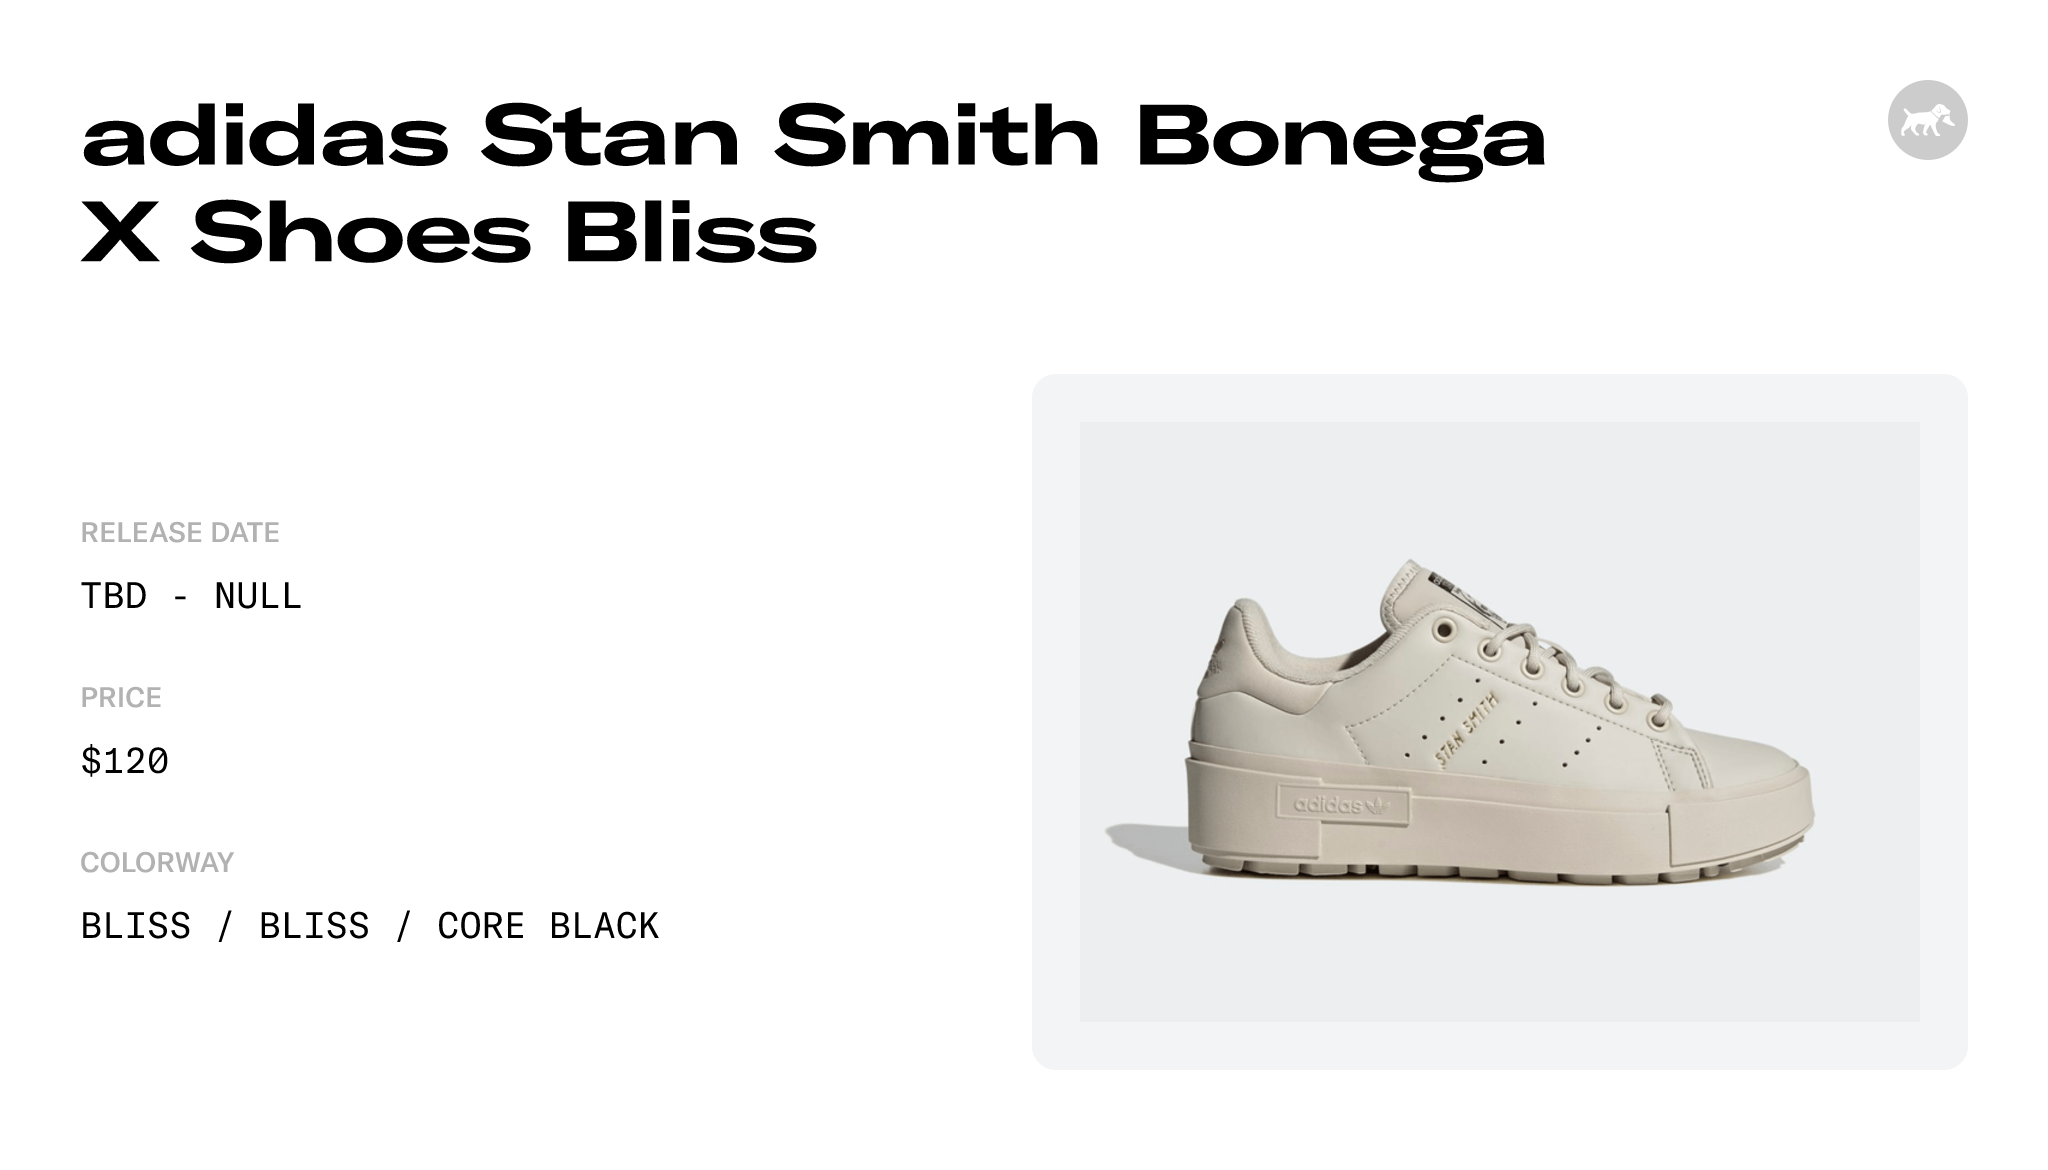 GY1499 - Raffles Stan adidas Date Release X Smith and Shoes Bonega Bliss